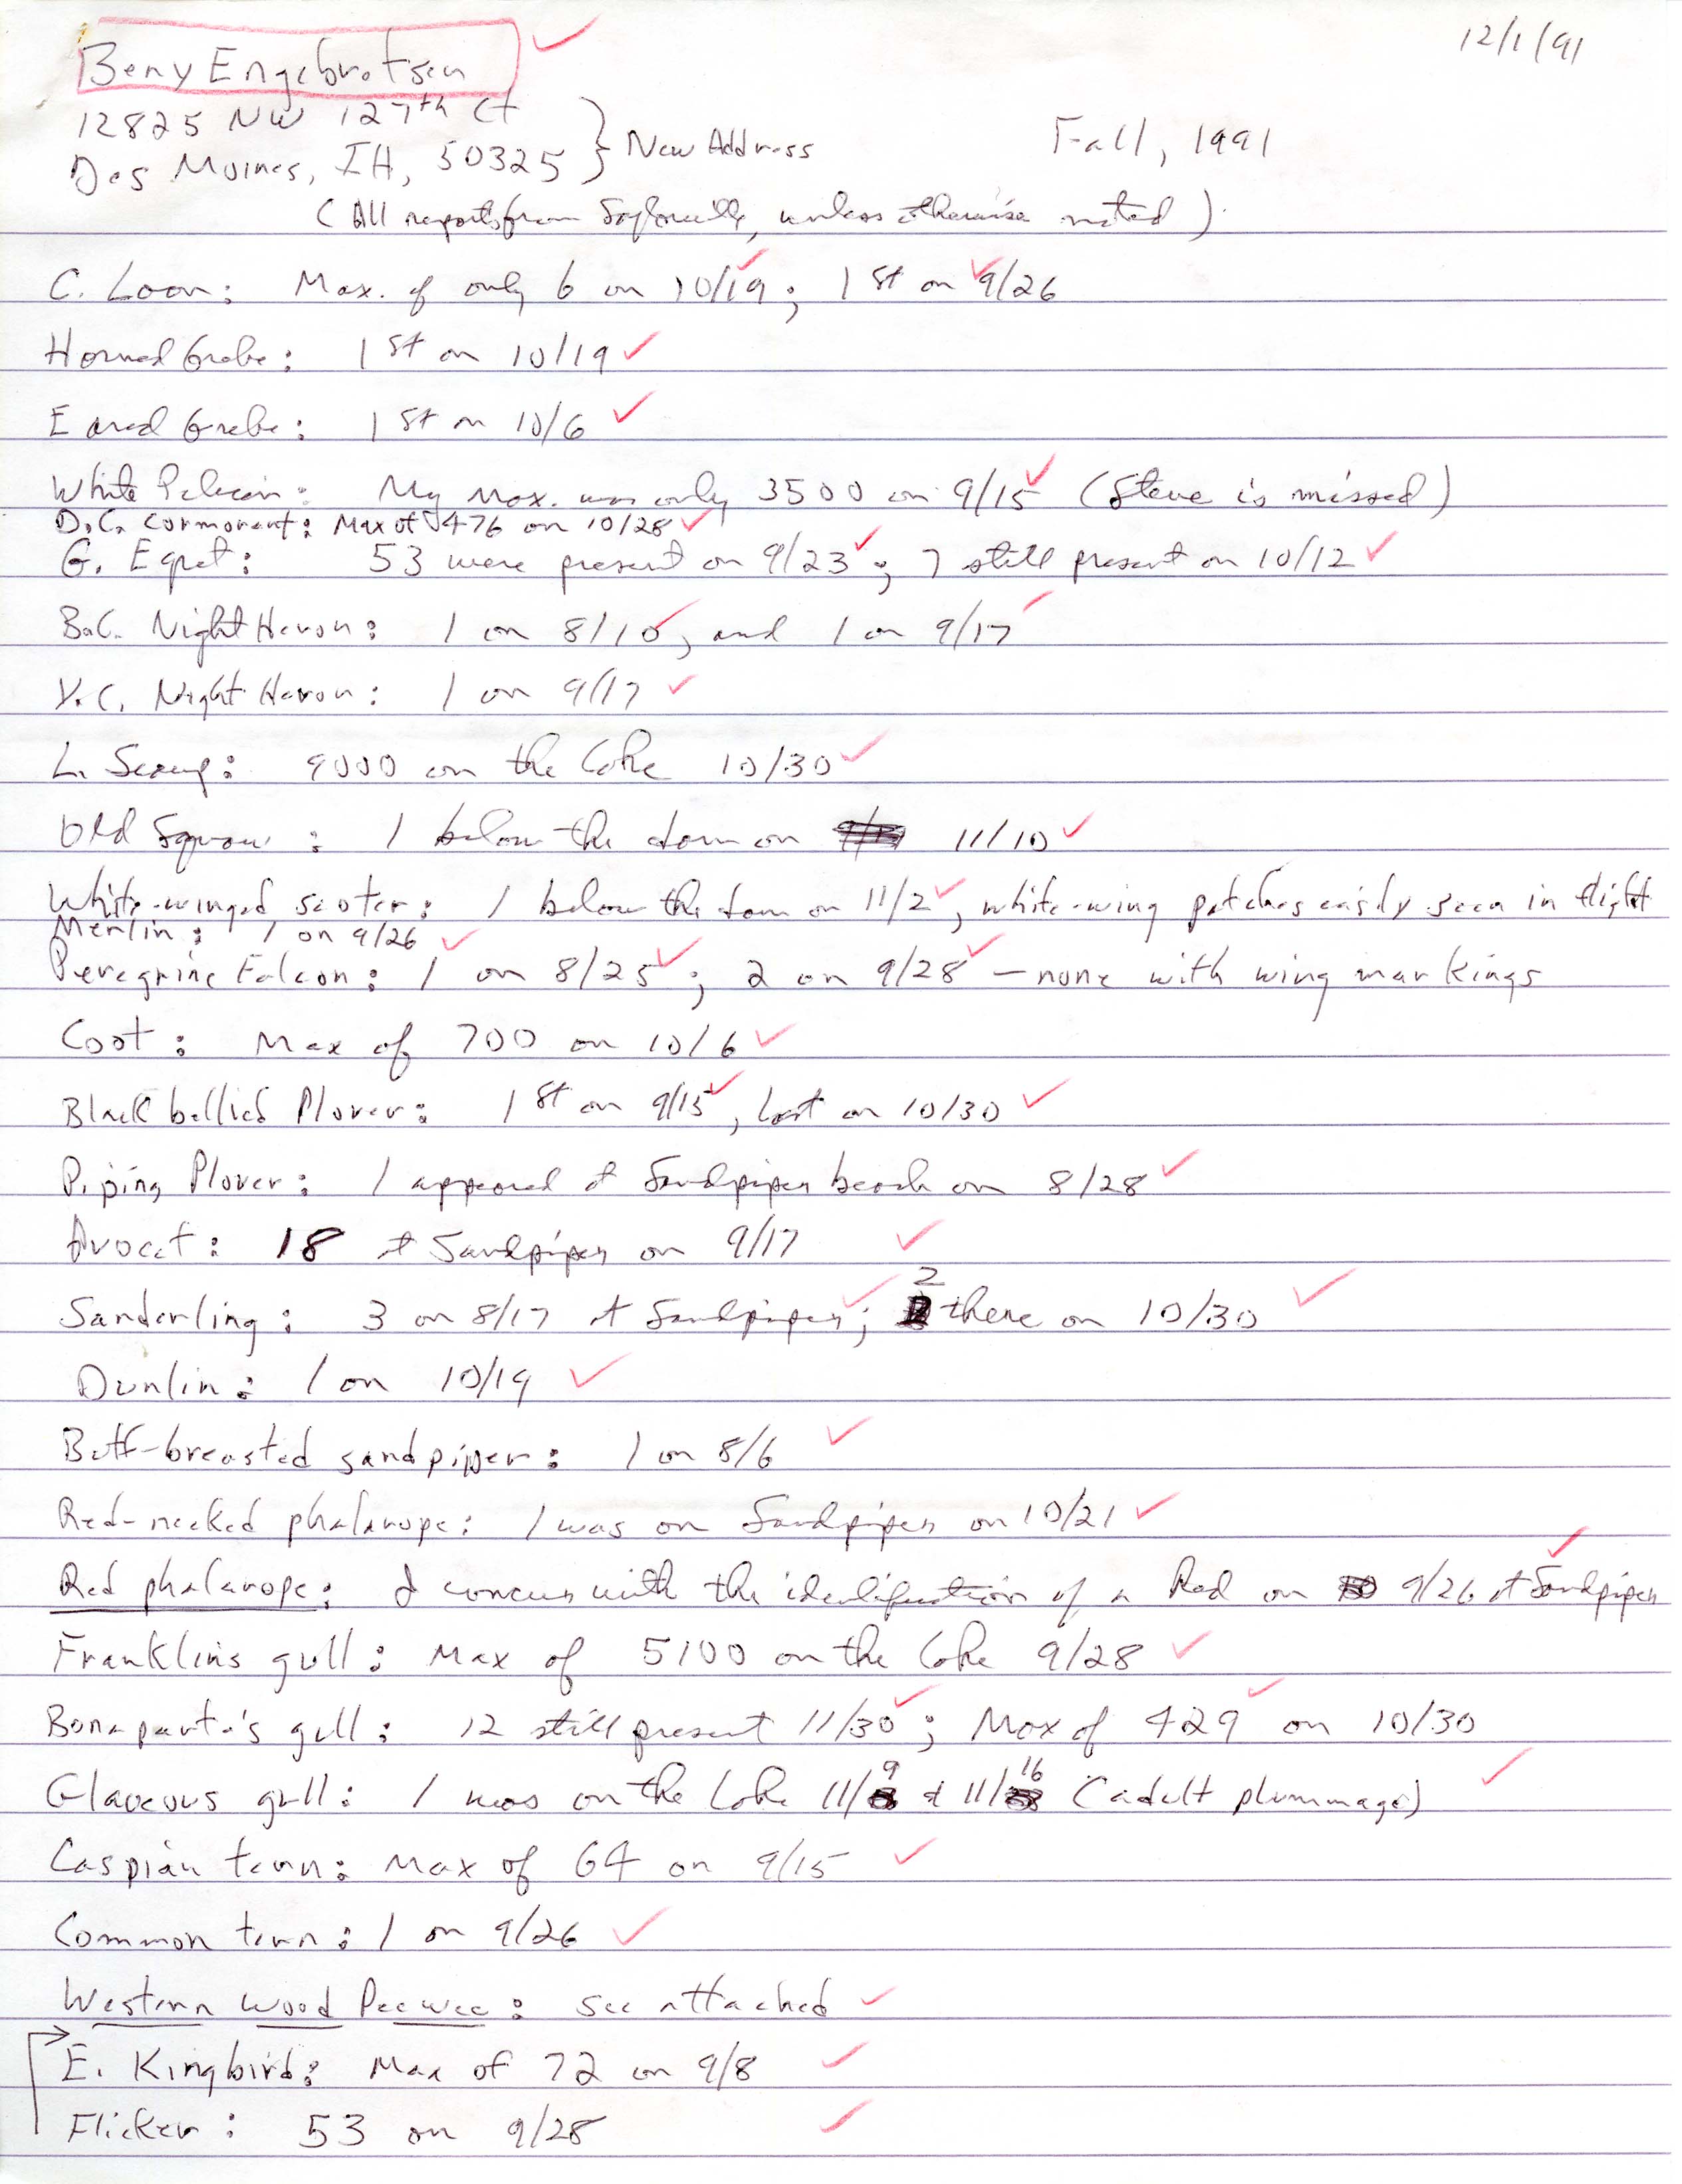 Field notes contributed by Bery Engebretsen, December 1, 1991